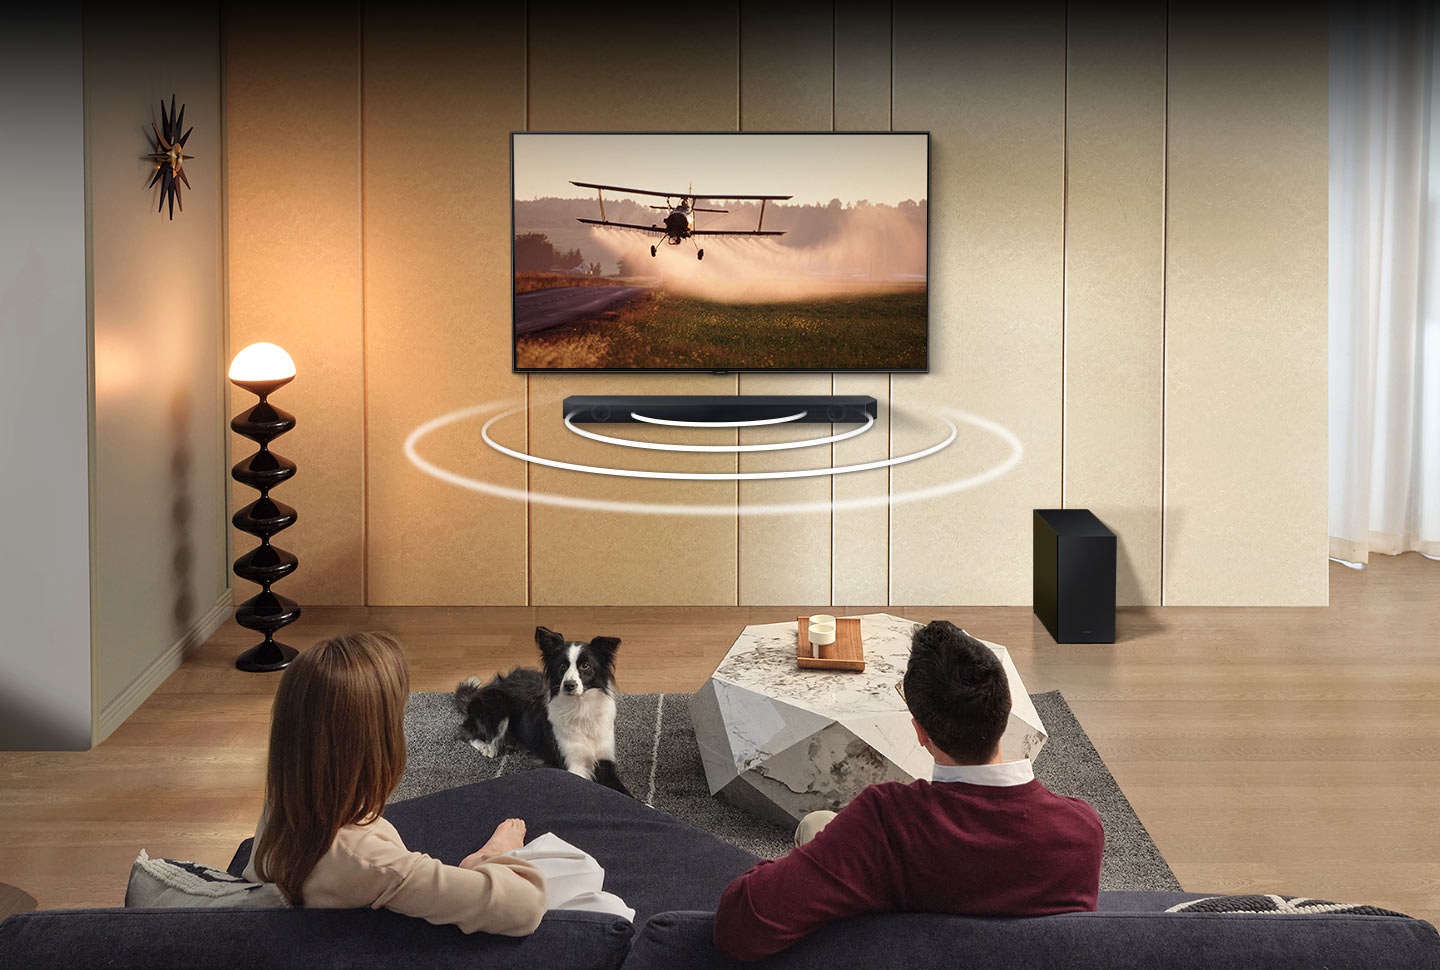 A man and woman are sitting in a living room with sound waves that come out of the Q60C's front speakers.